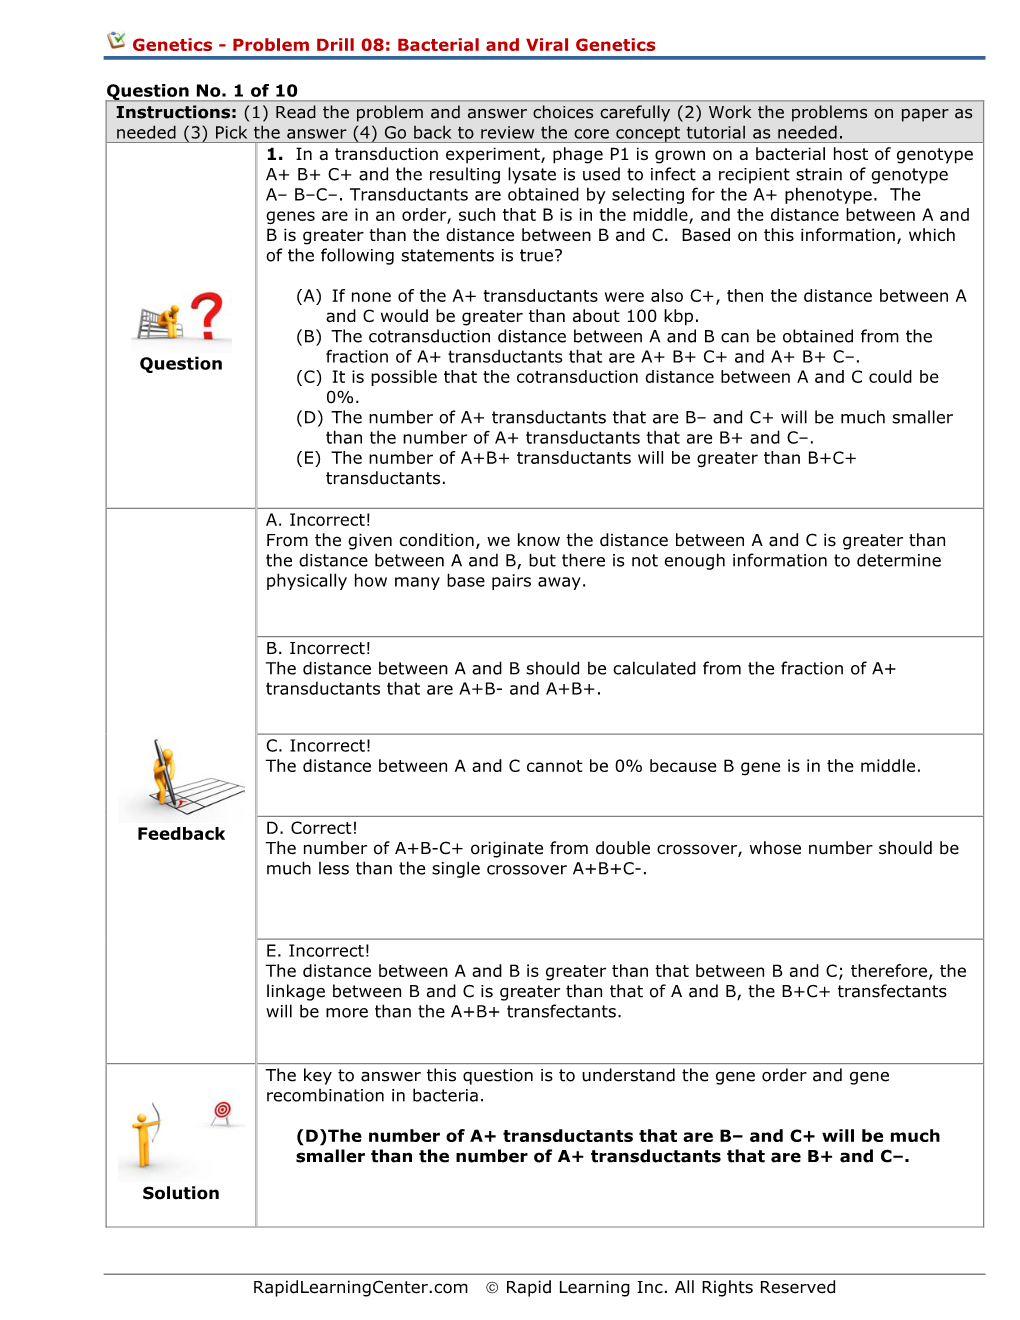 Problem Drill 08: Bacterial and Viral Genetics Q